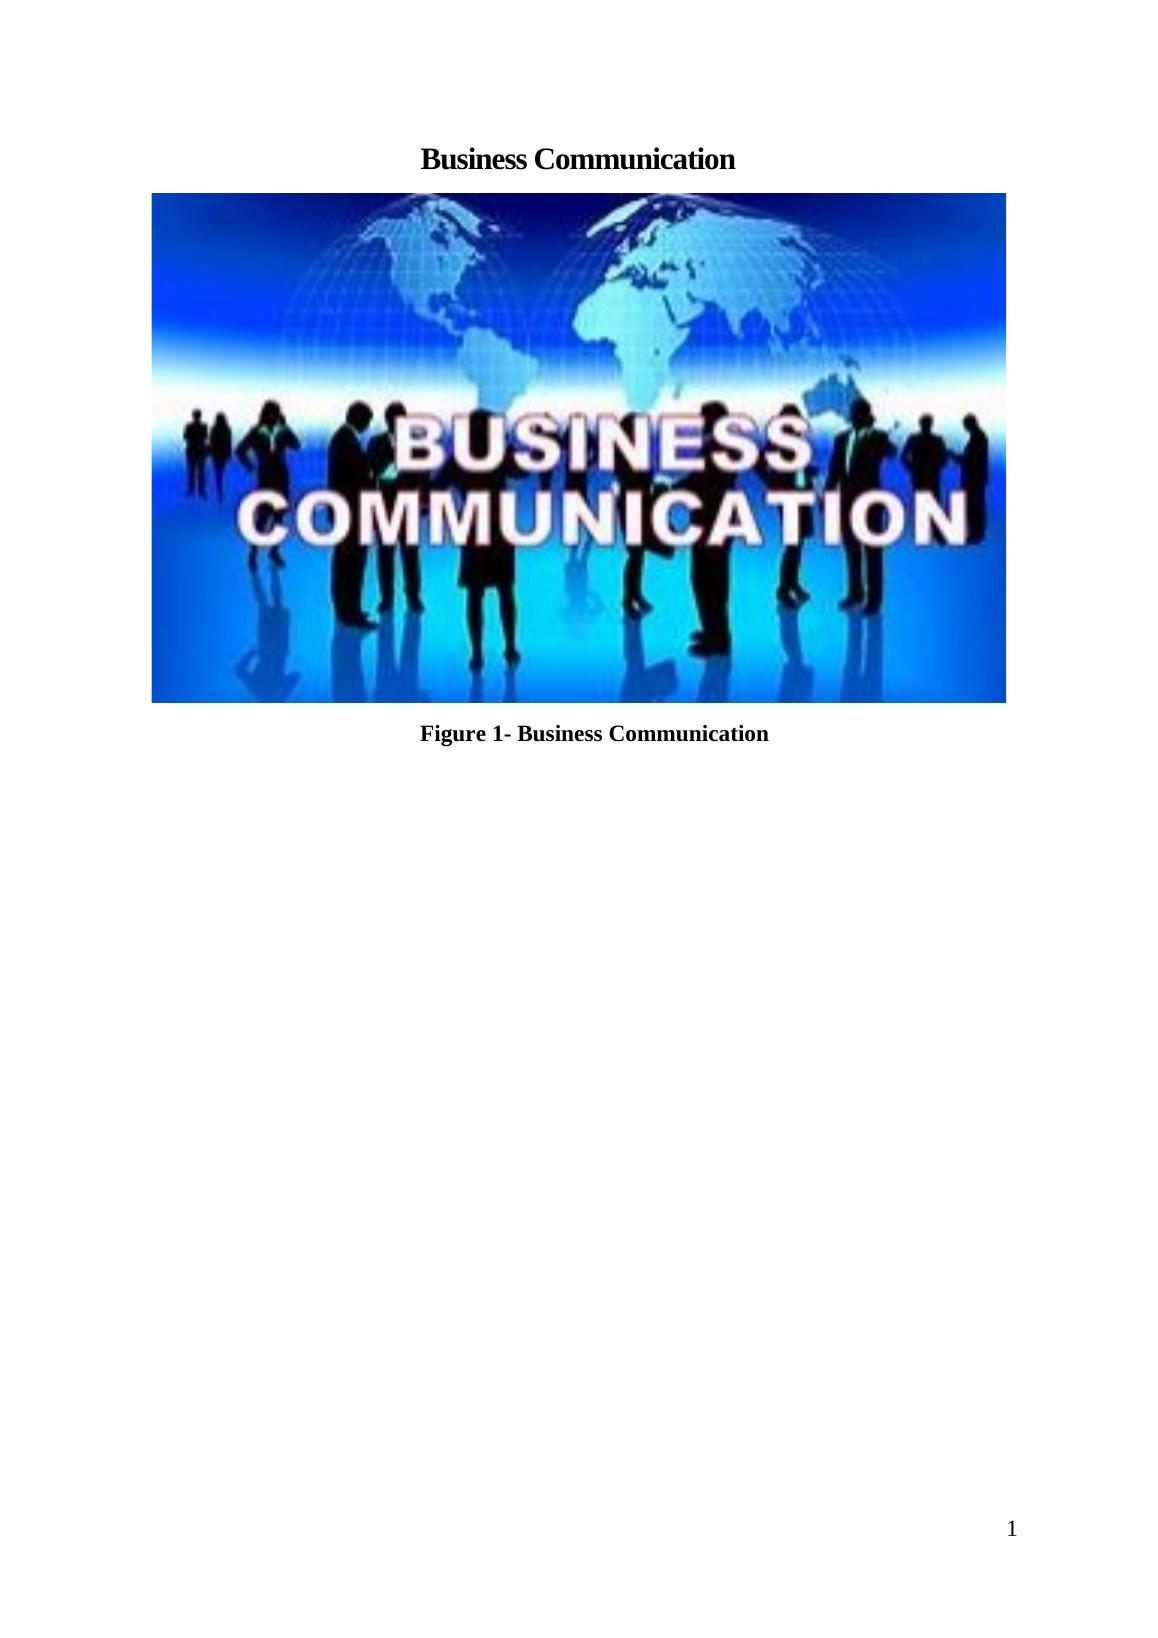 Introduction to Business Communication Assignment_1